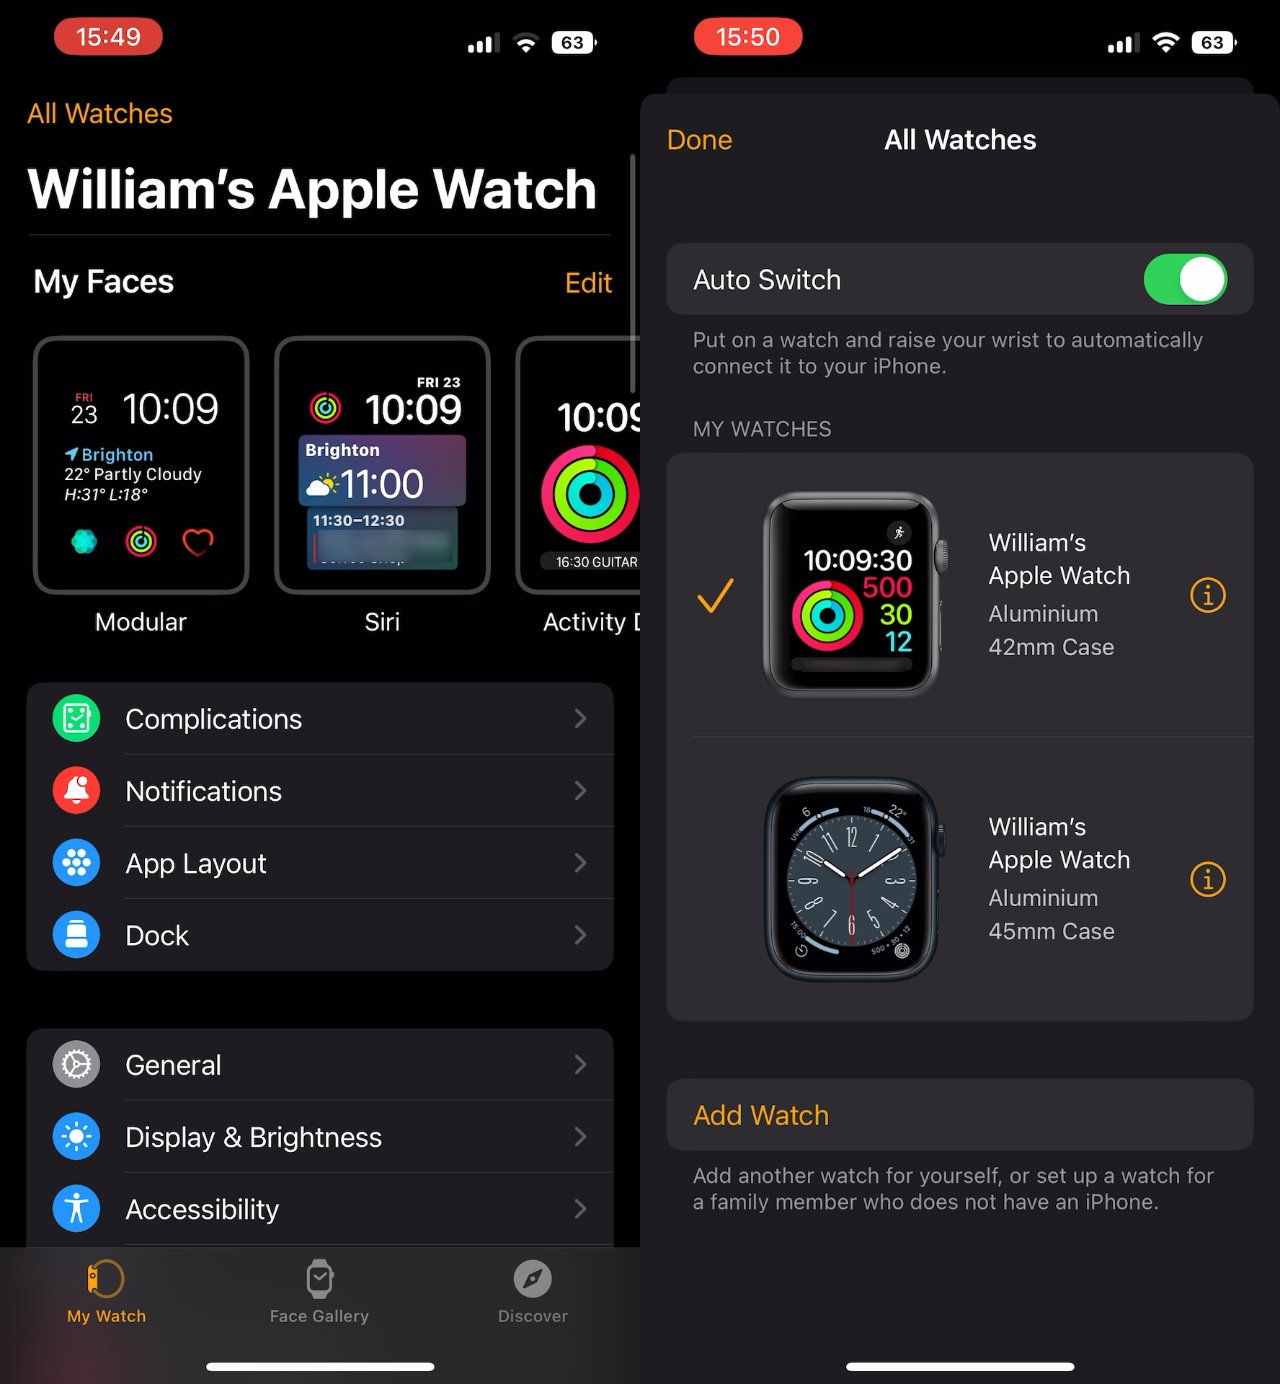 Tap All Watches at top left to see your multiple watches, or to add another one